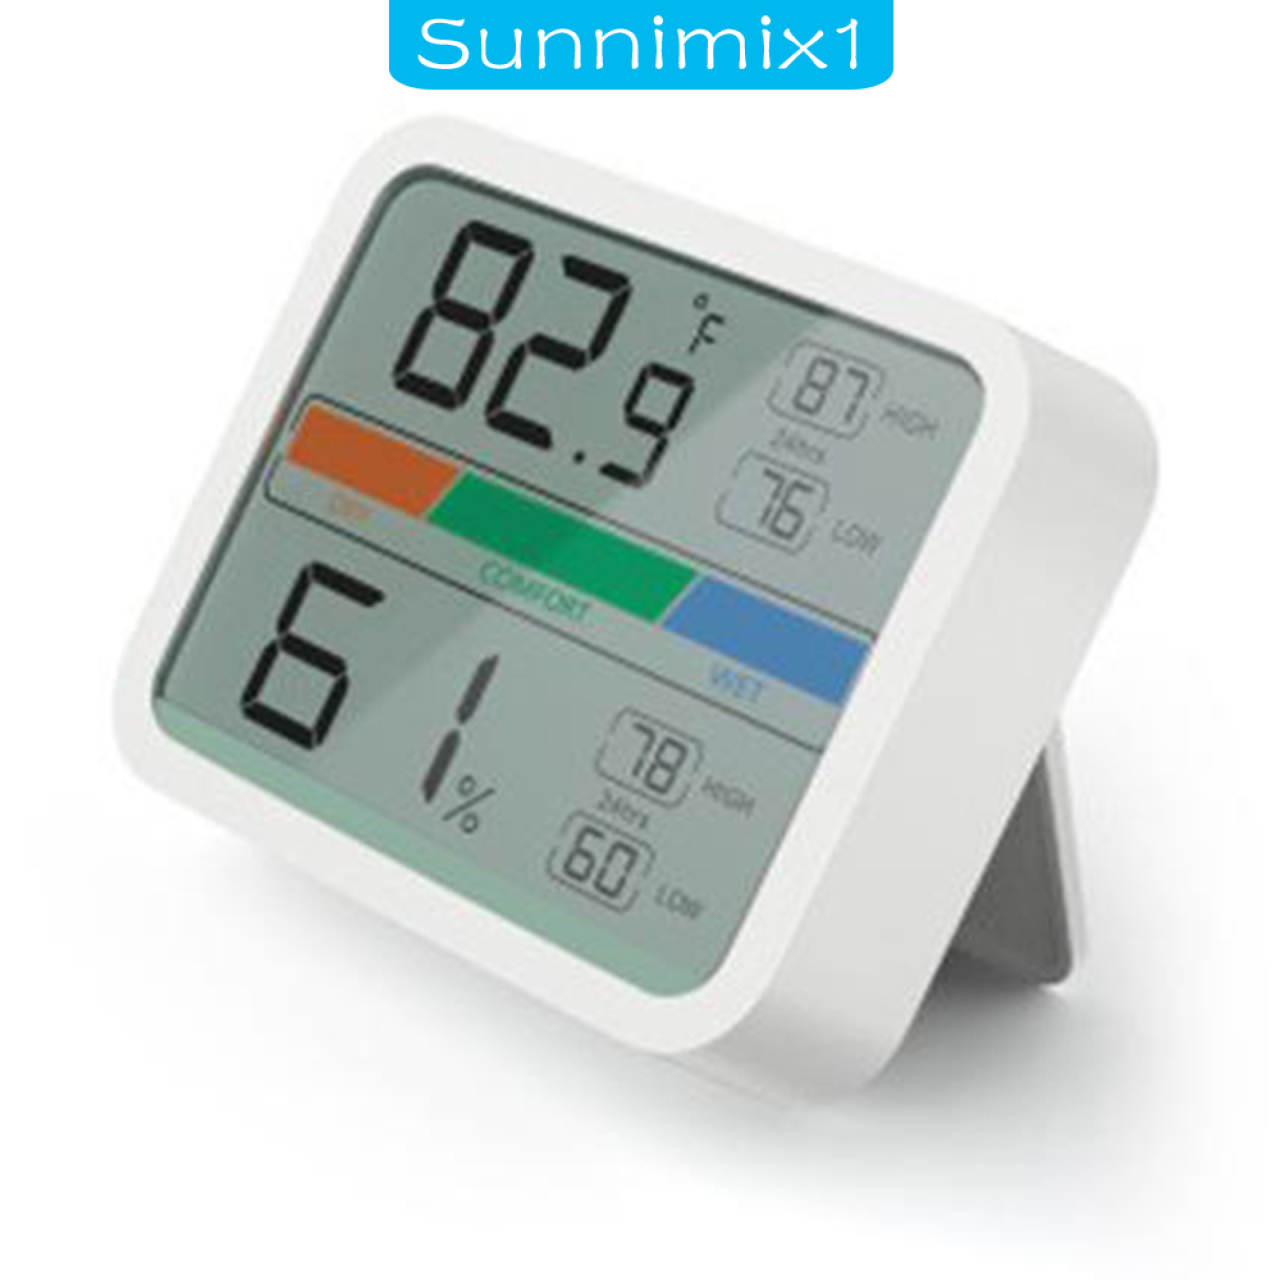 [SUNNIMIX1]Digital LCD Thermometer Hygrometer Humidity Temperature Meter for Basement